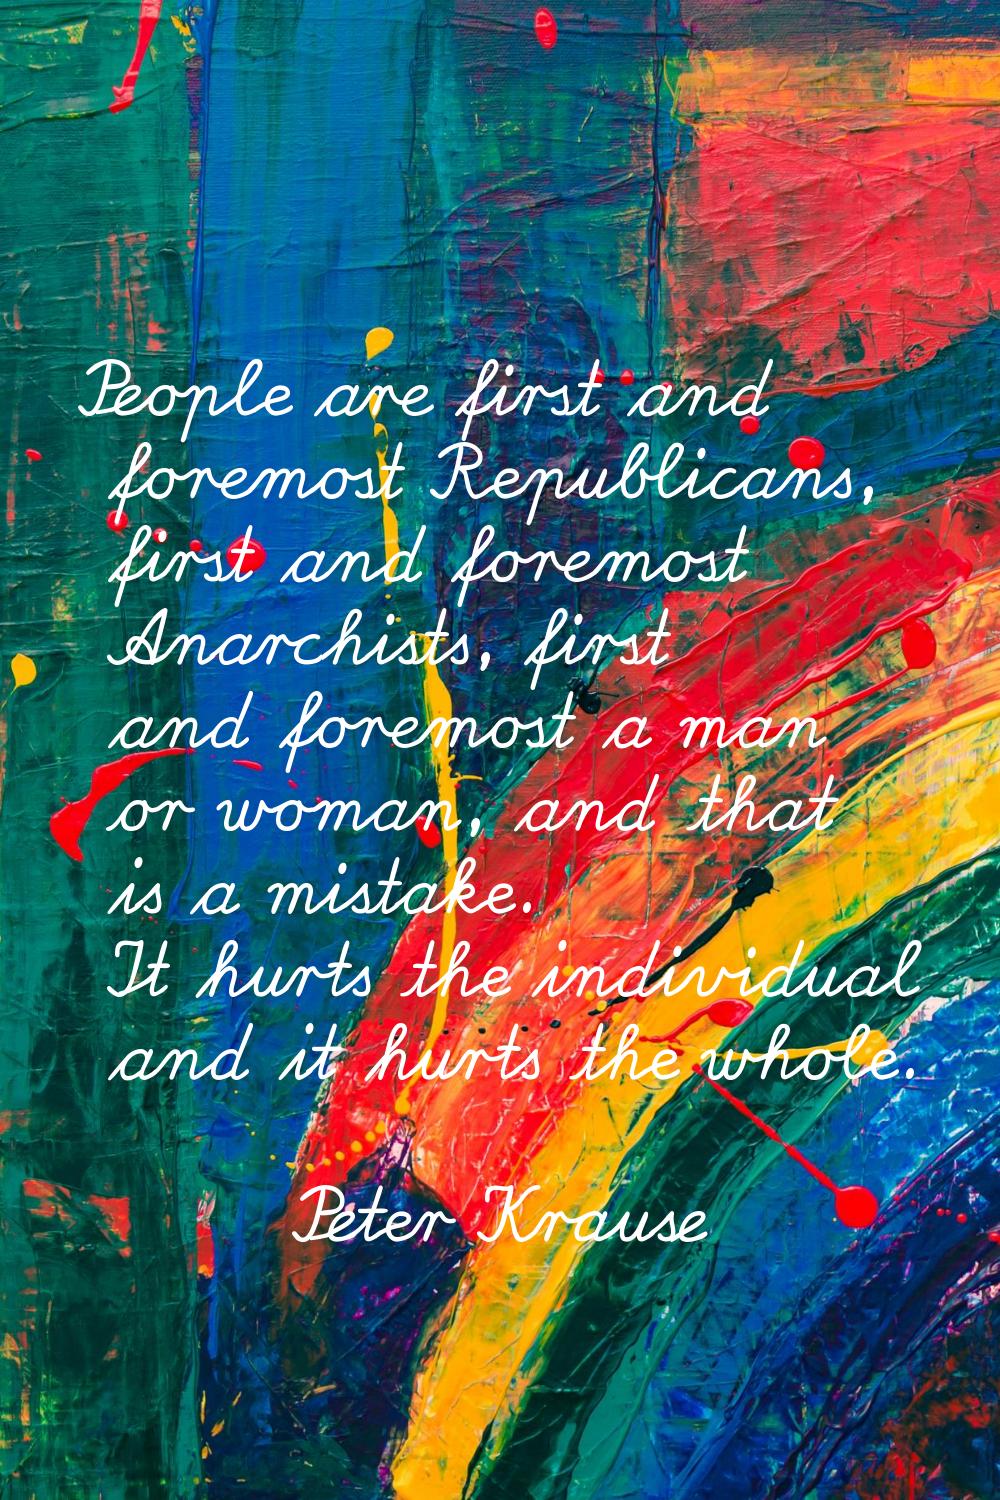 People are first and foremost Republicans, first and foremost Anarchists, first and foremost a man 